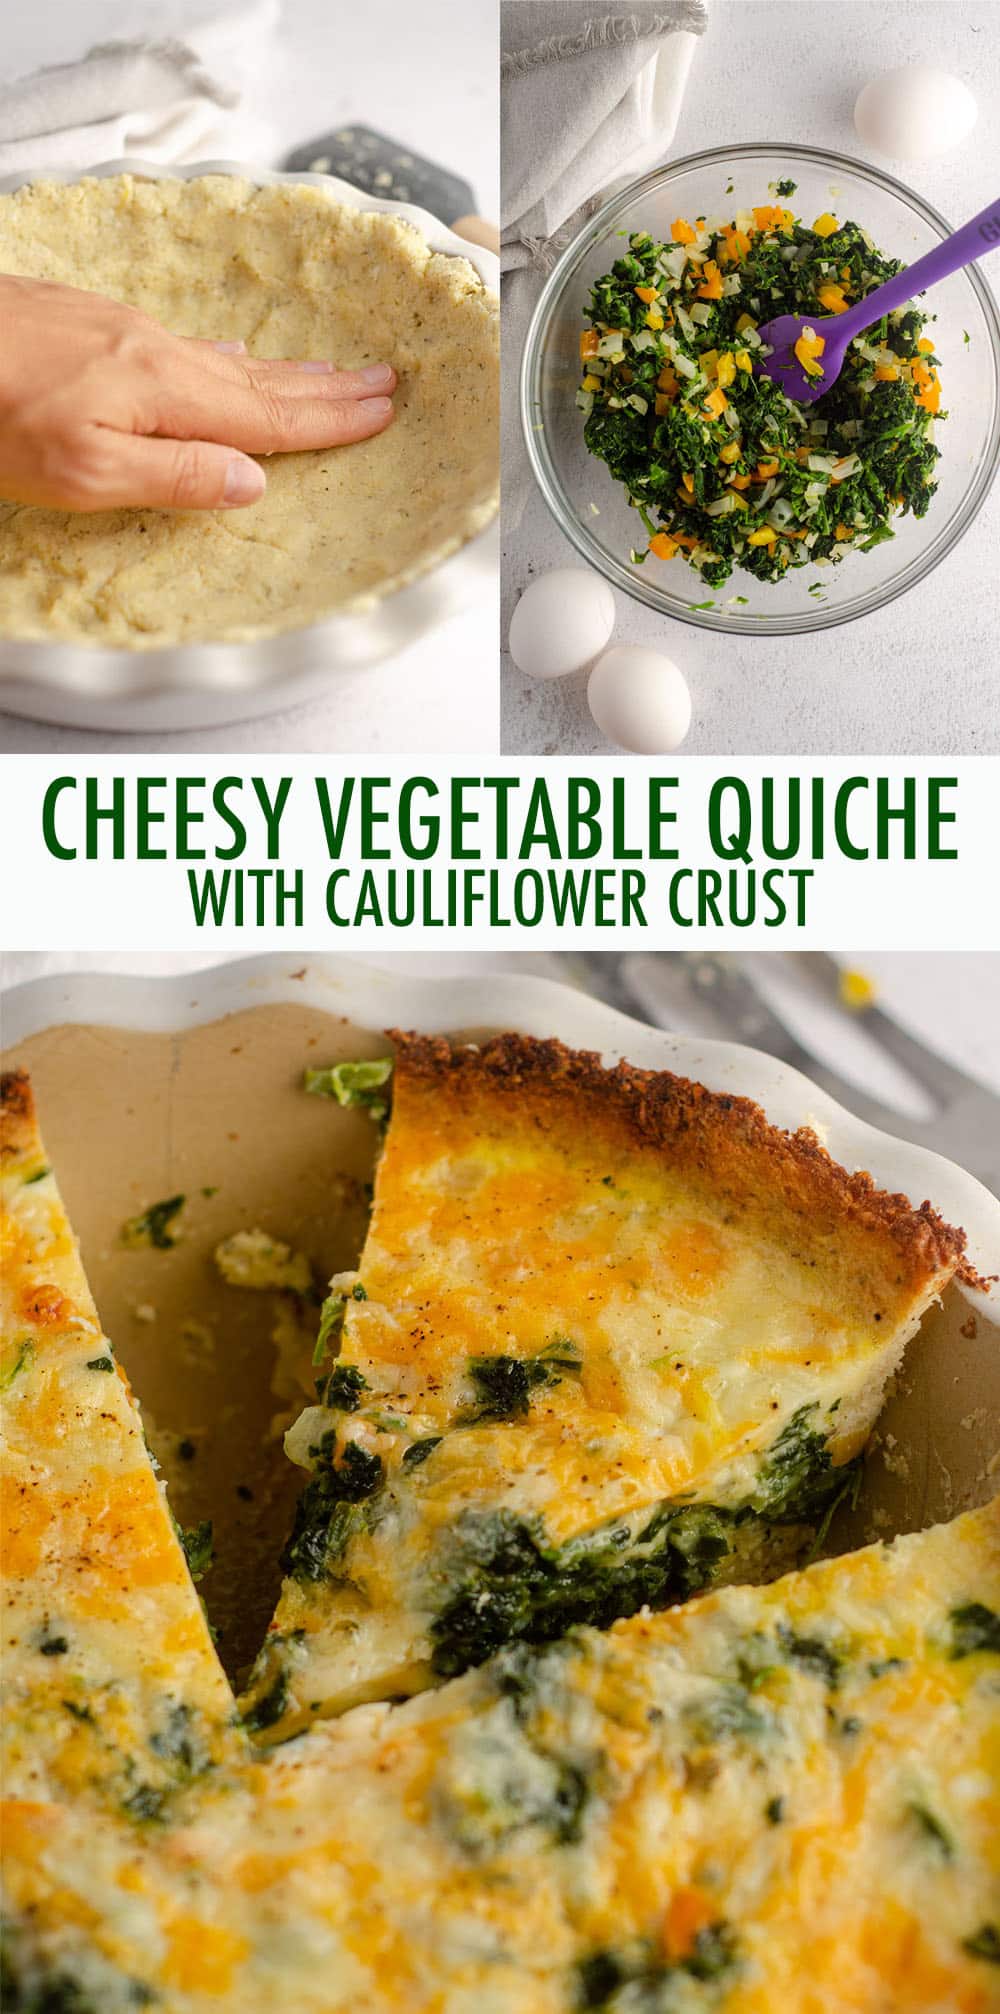 A cheesy quiche loaded with veggies, baked in a low-carb, gluten free, and deliciously seasoned cauliflower crust. via @frshaprilflours